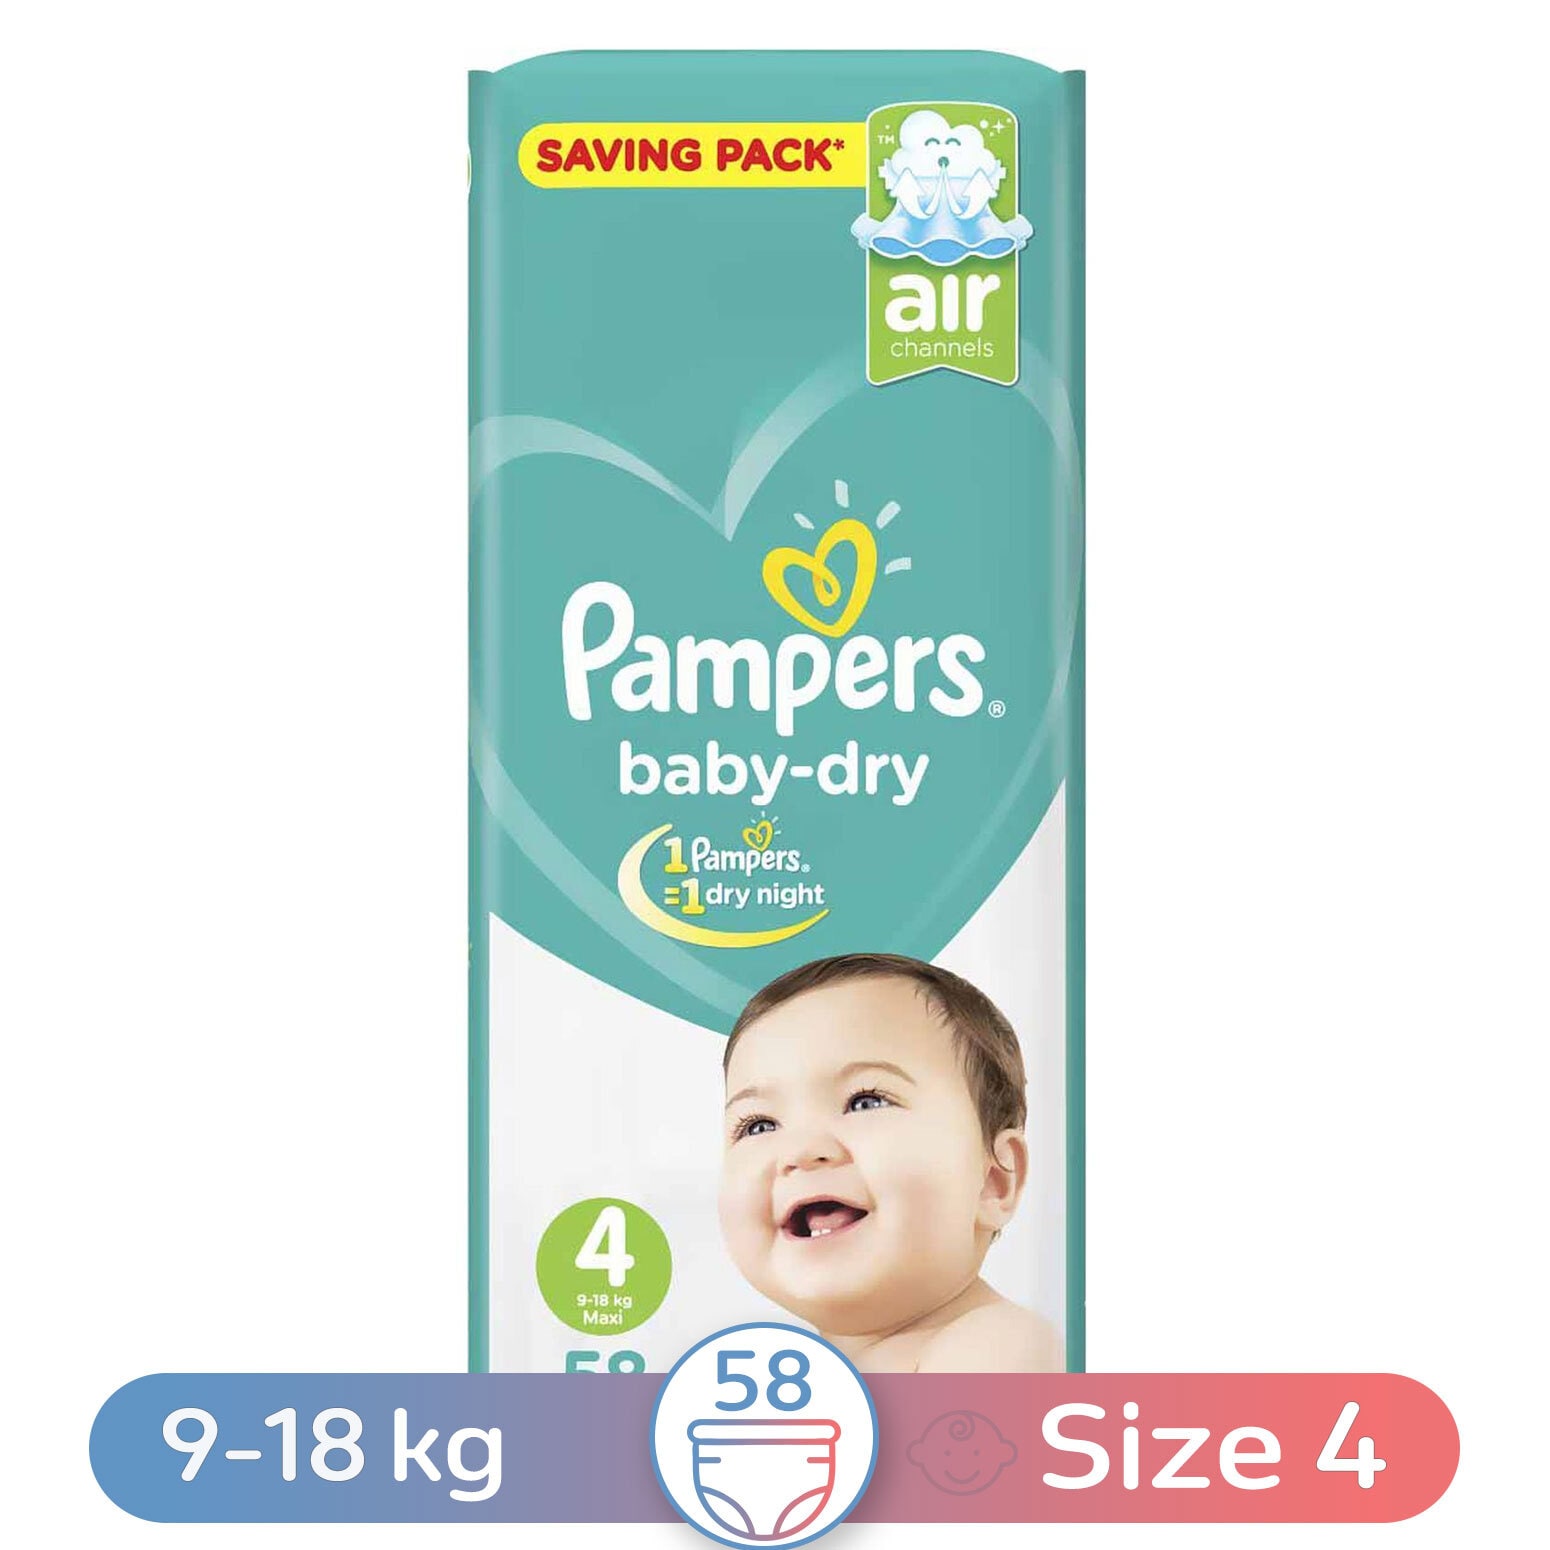 focus Ineenstorting zeemijl Buy Pampers Baby-Dry Diapers 4 Maxi, 9-18 Kg - 58 Diapers Online - Shop  Baby Products on Carrefour Egypt